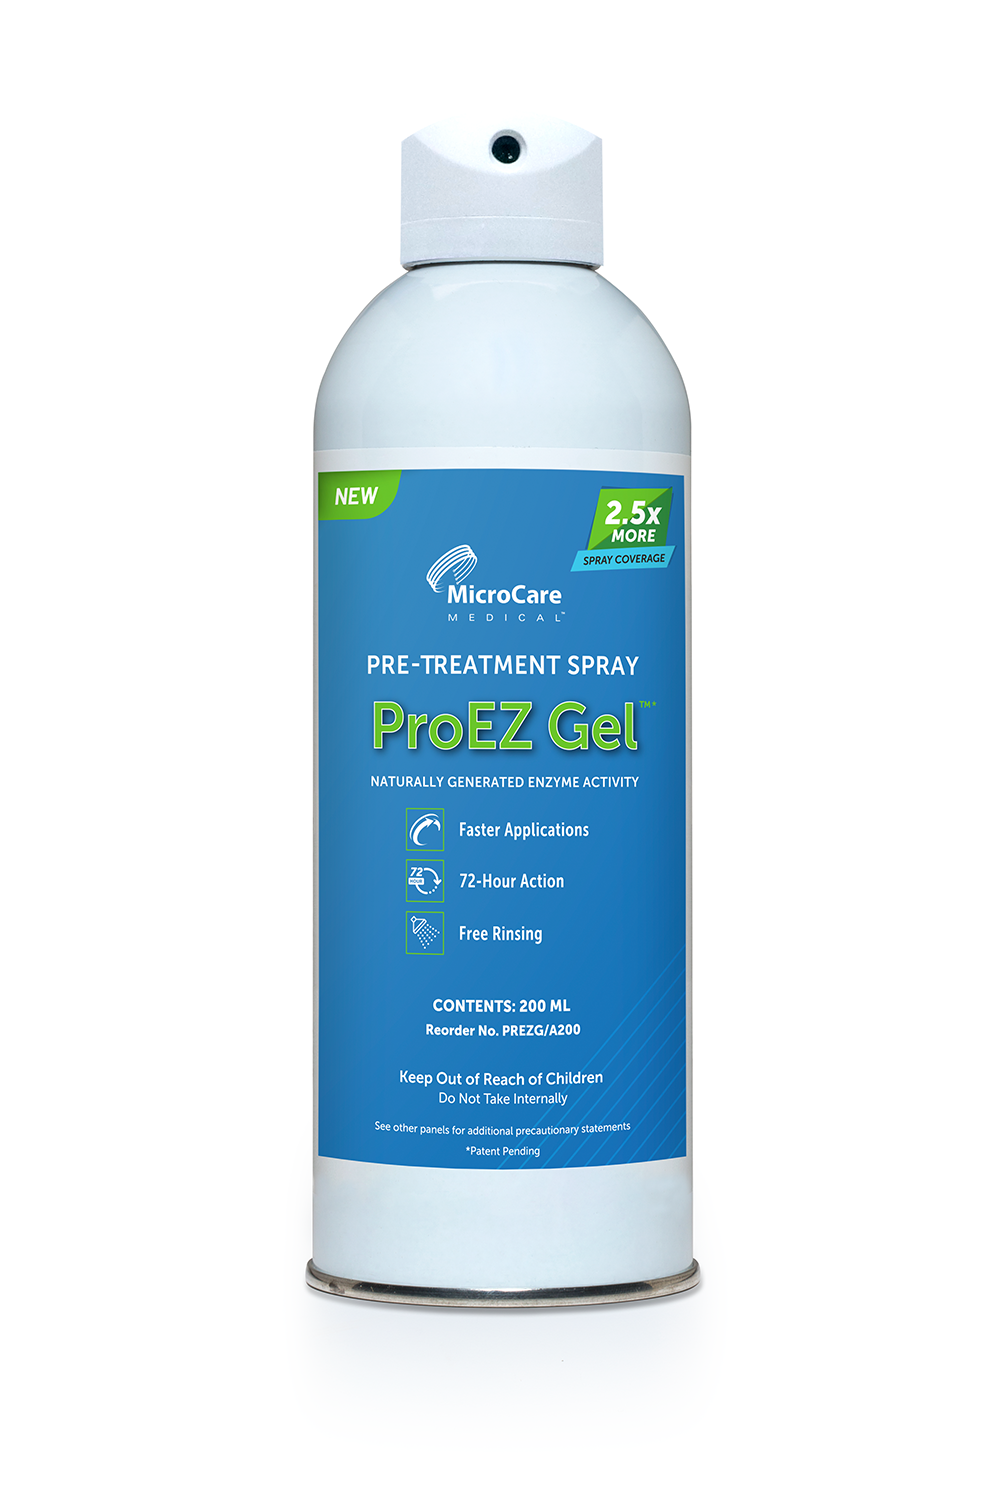 MicroCare Medical’s New ProEZ Gel Aerosol Pre-Treatment Spray Provides Optimal Coverage for Instruments